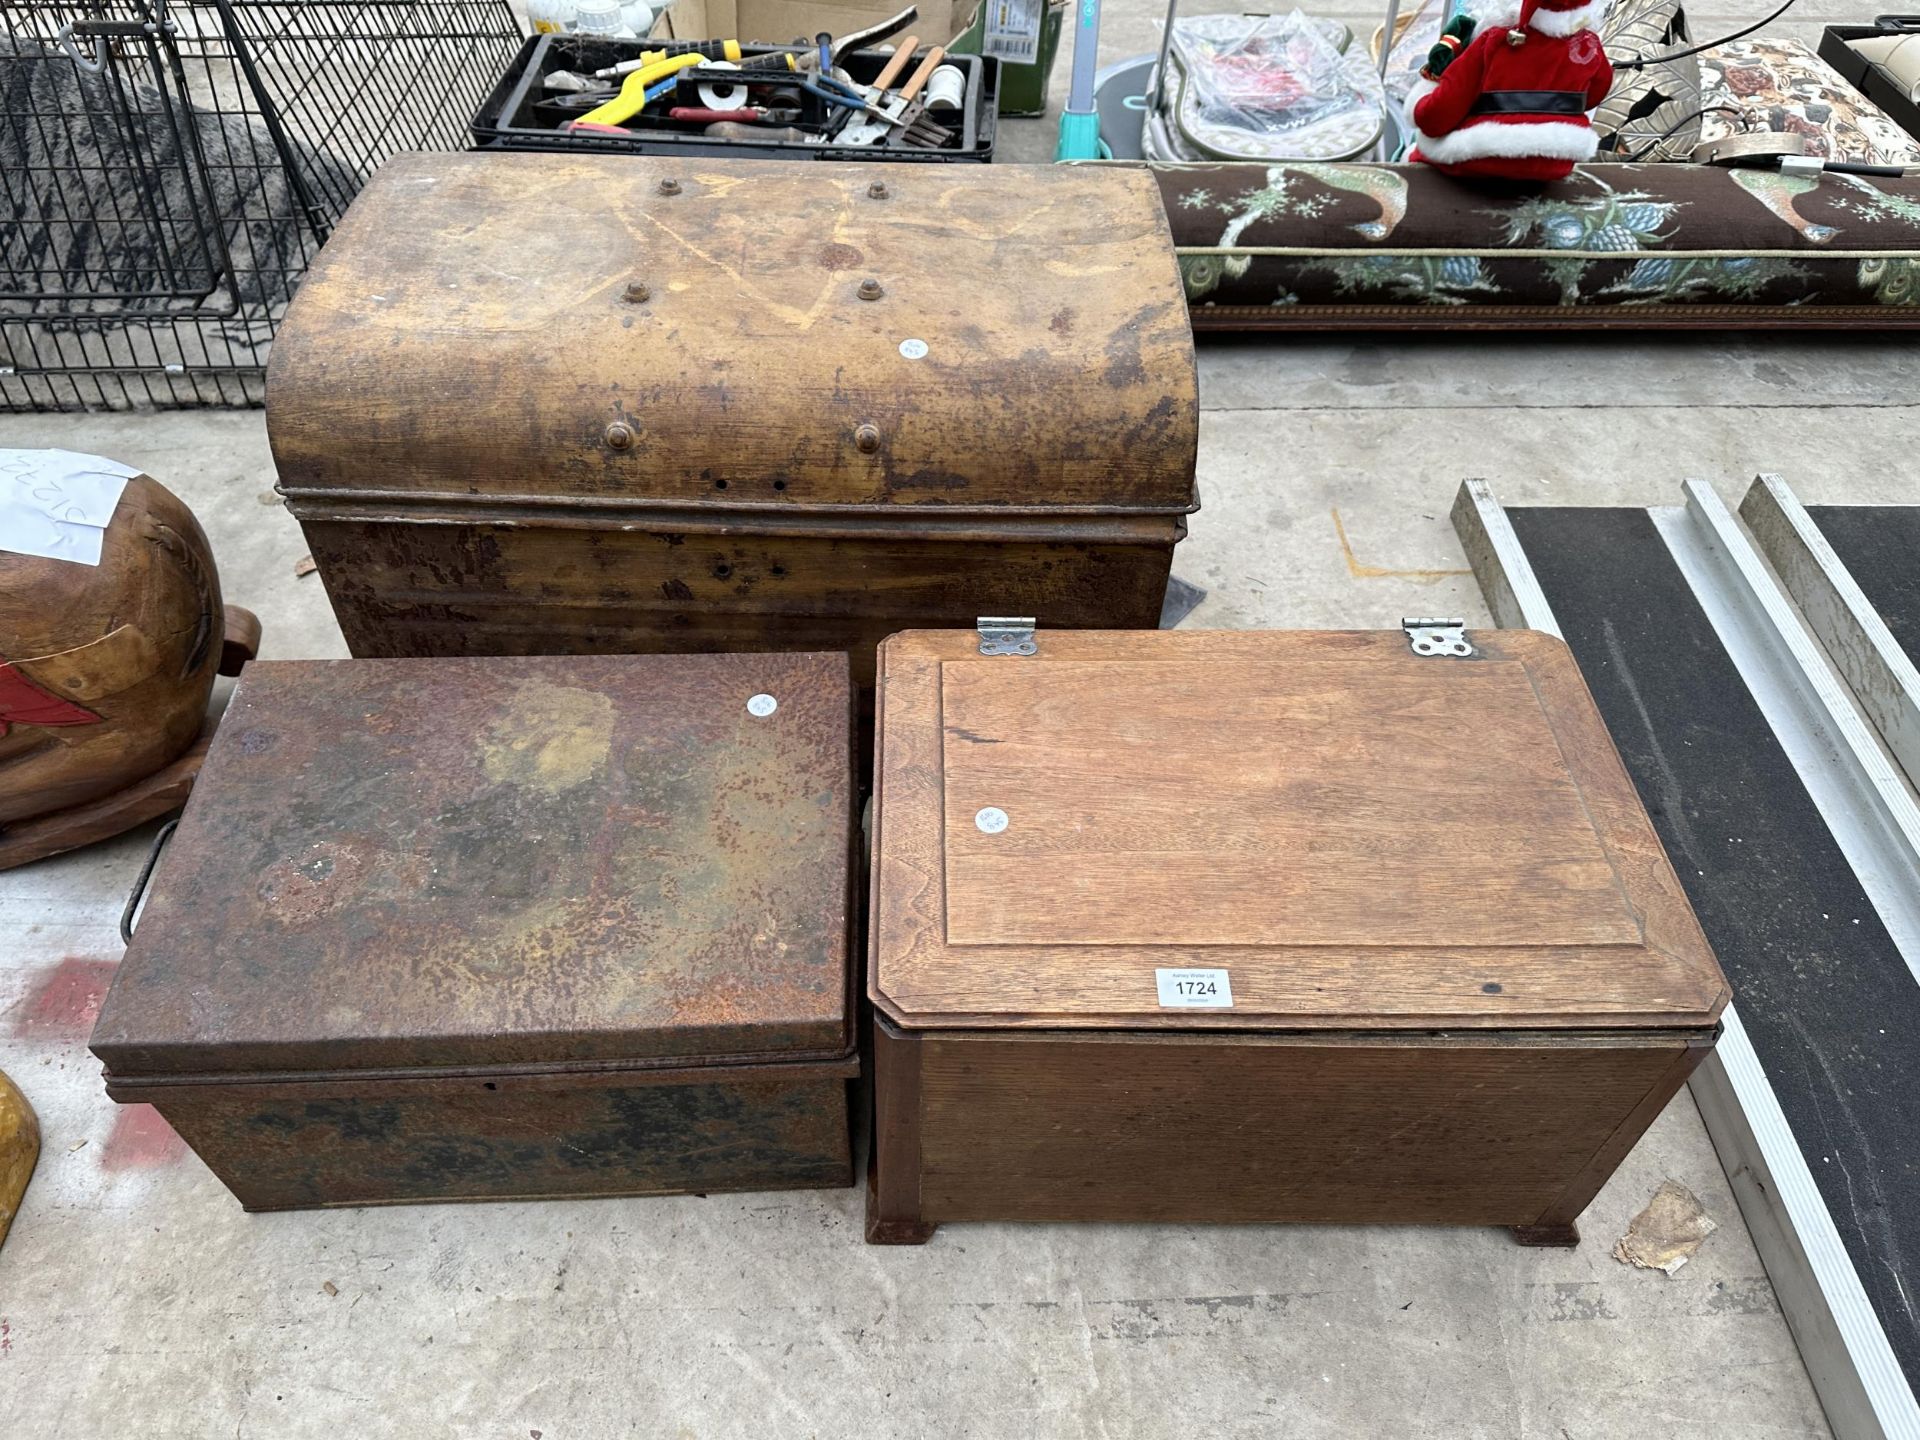 A WOODEN LIDDED BOX AND TWO VINTAGE METAL TRUNKS